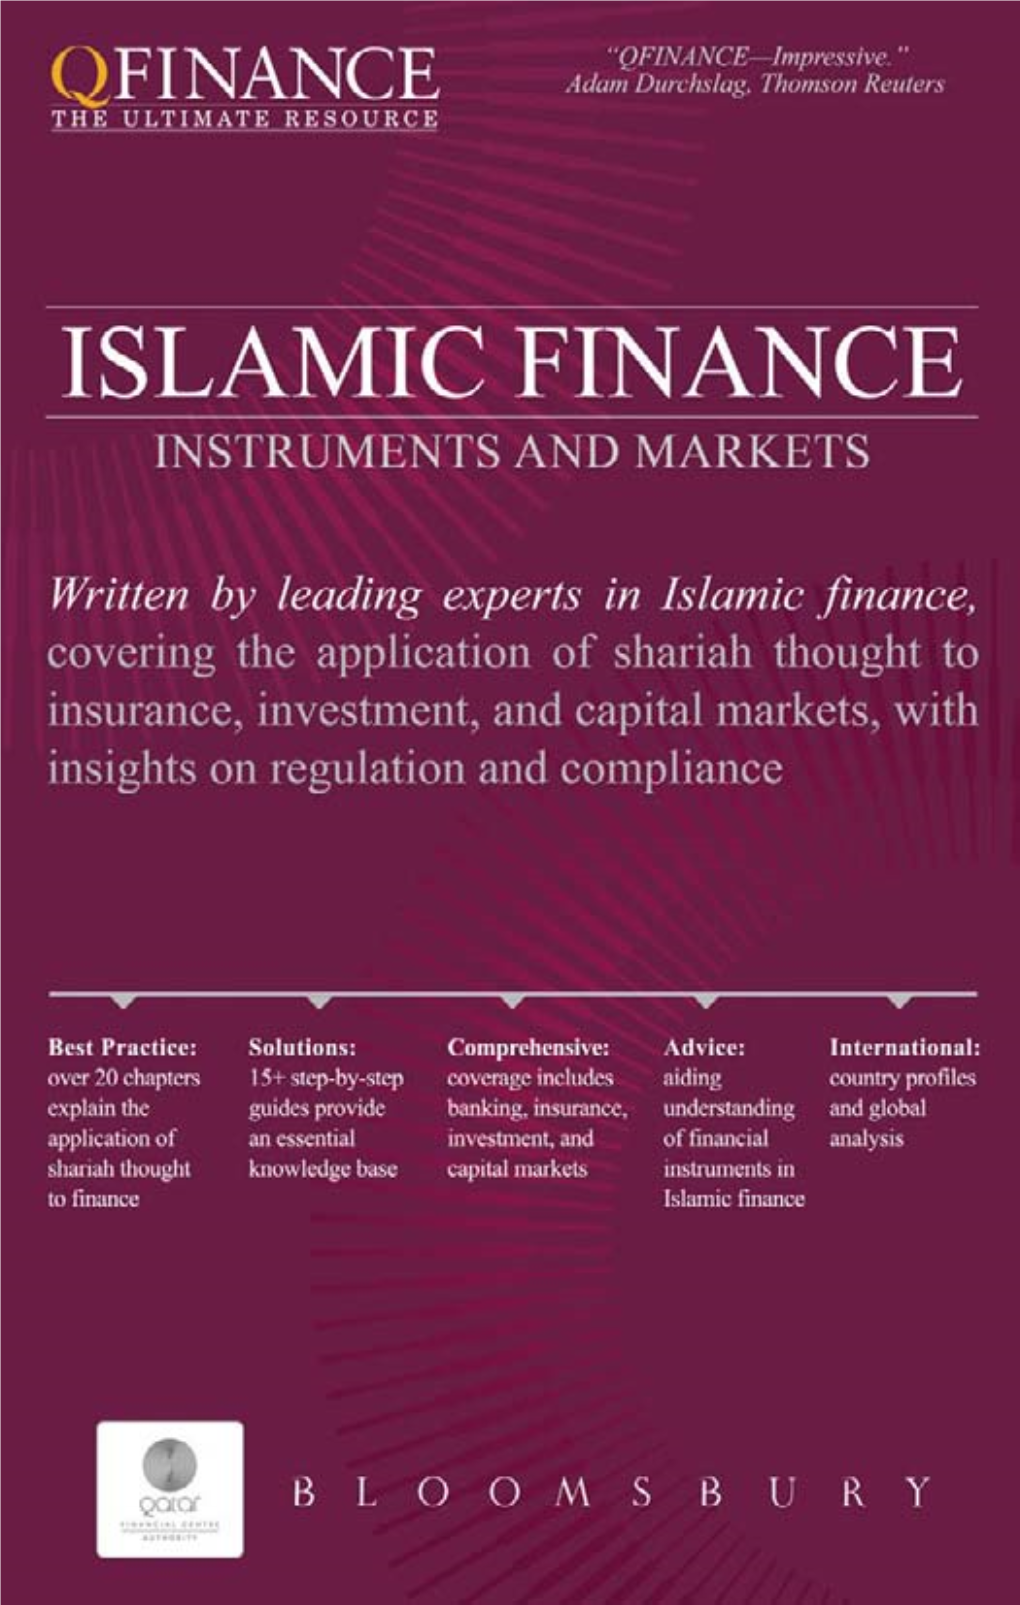 ISLAMIC FINANCE INSTRUMENTS and MARKETS This Page Intentionally Left Blank ISLAMIC FINANCE INSTRUMENTS and MARKETS Copyright © Bloomsbury Information Ltd, 2010